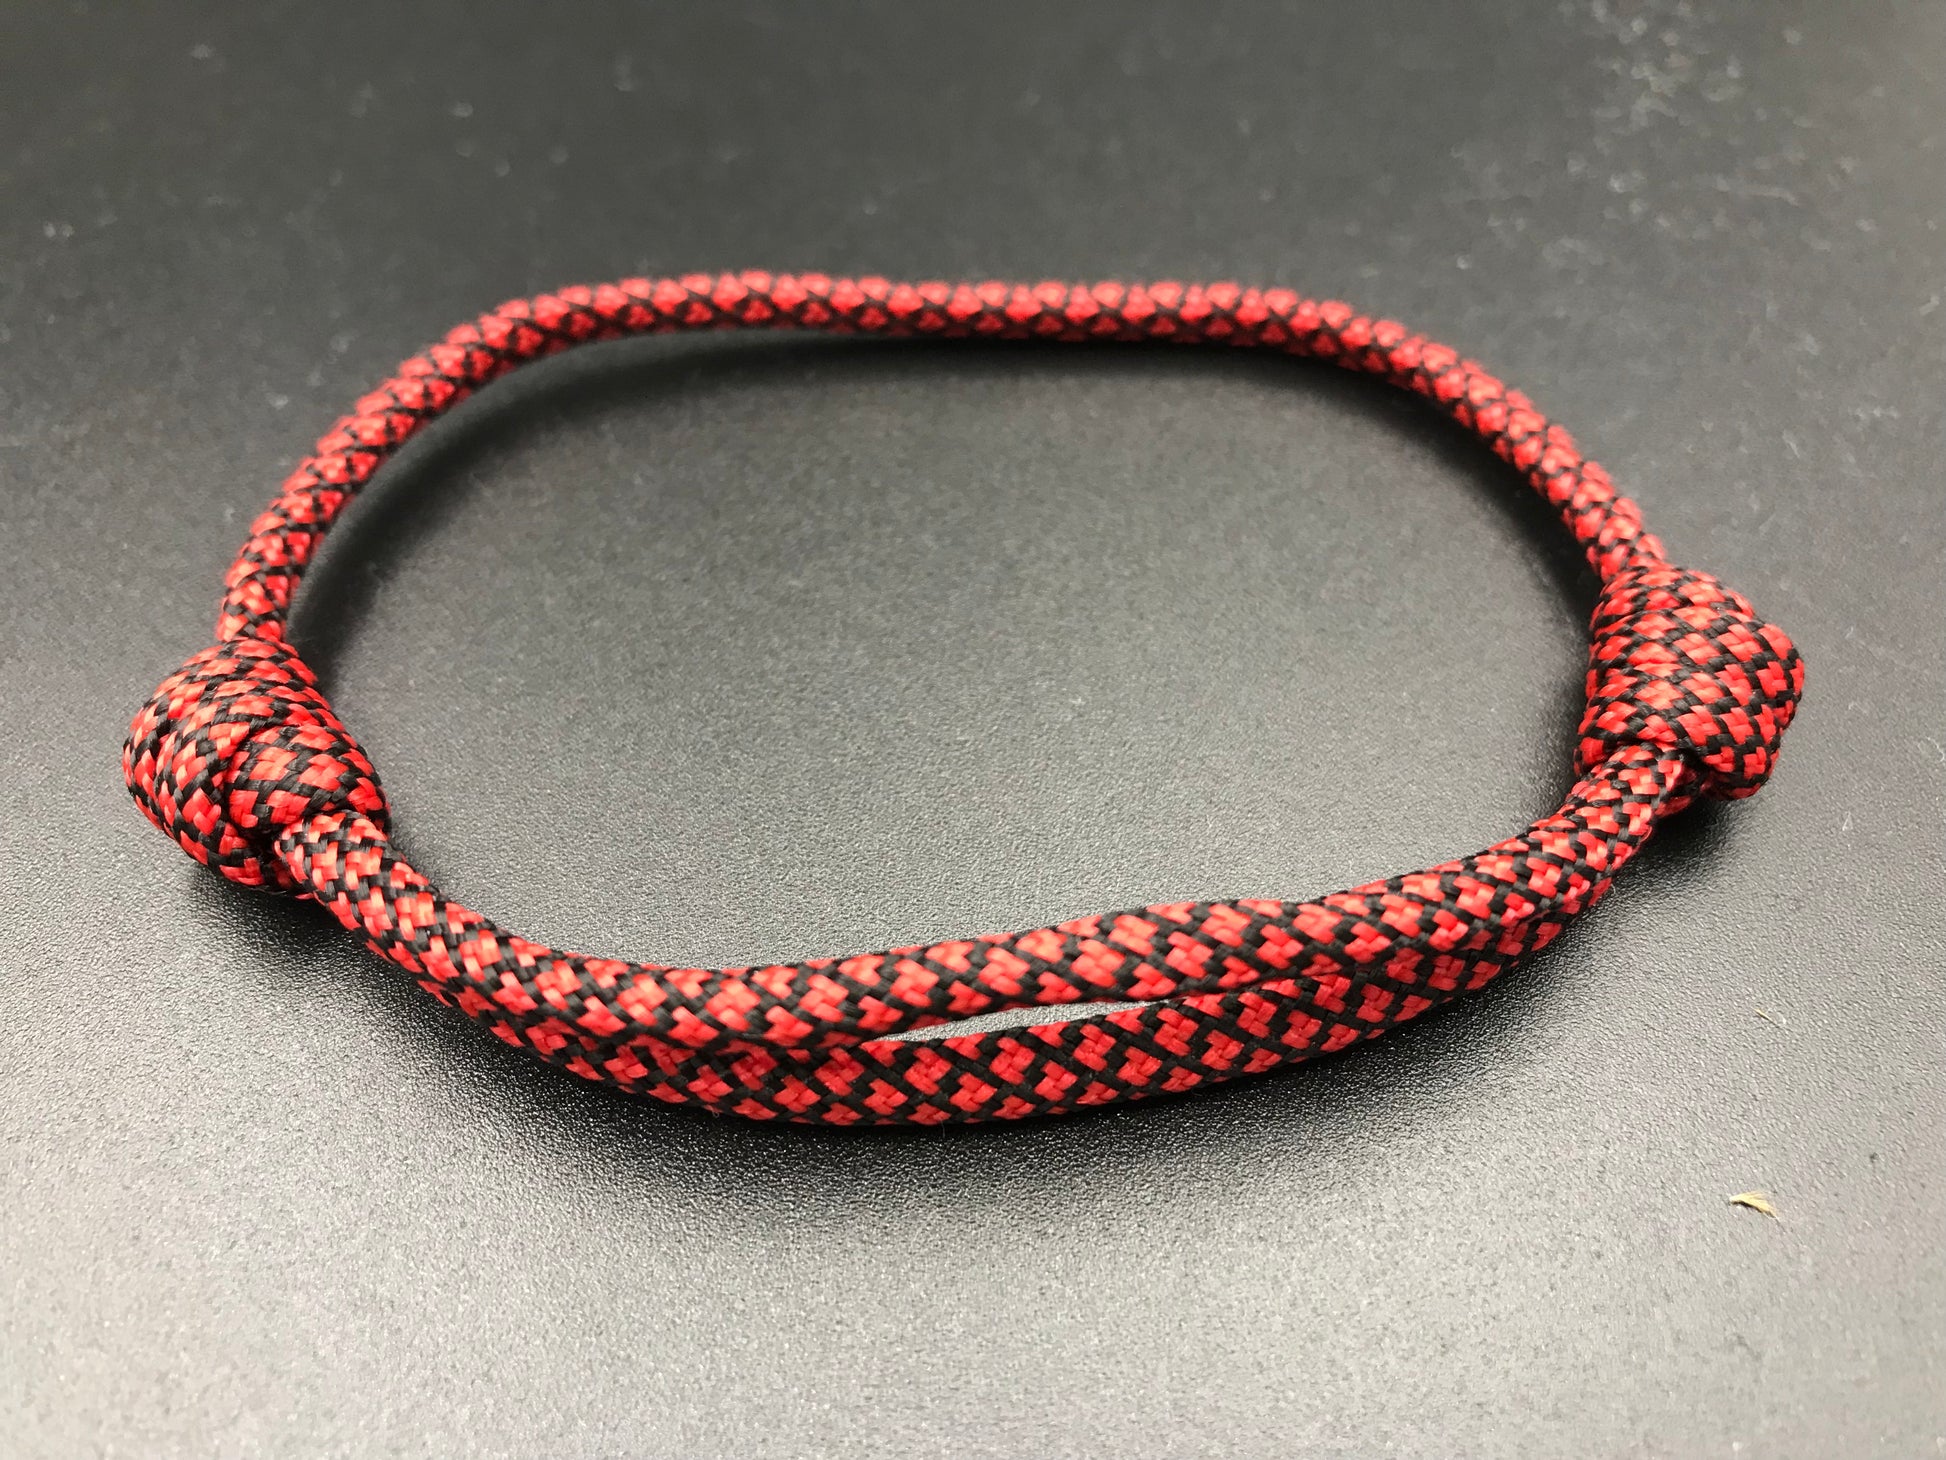 Paracord friendship bracelet in red with black diamond pattern 